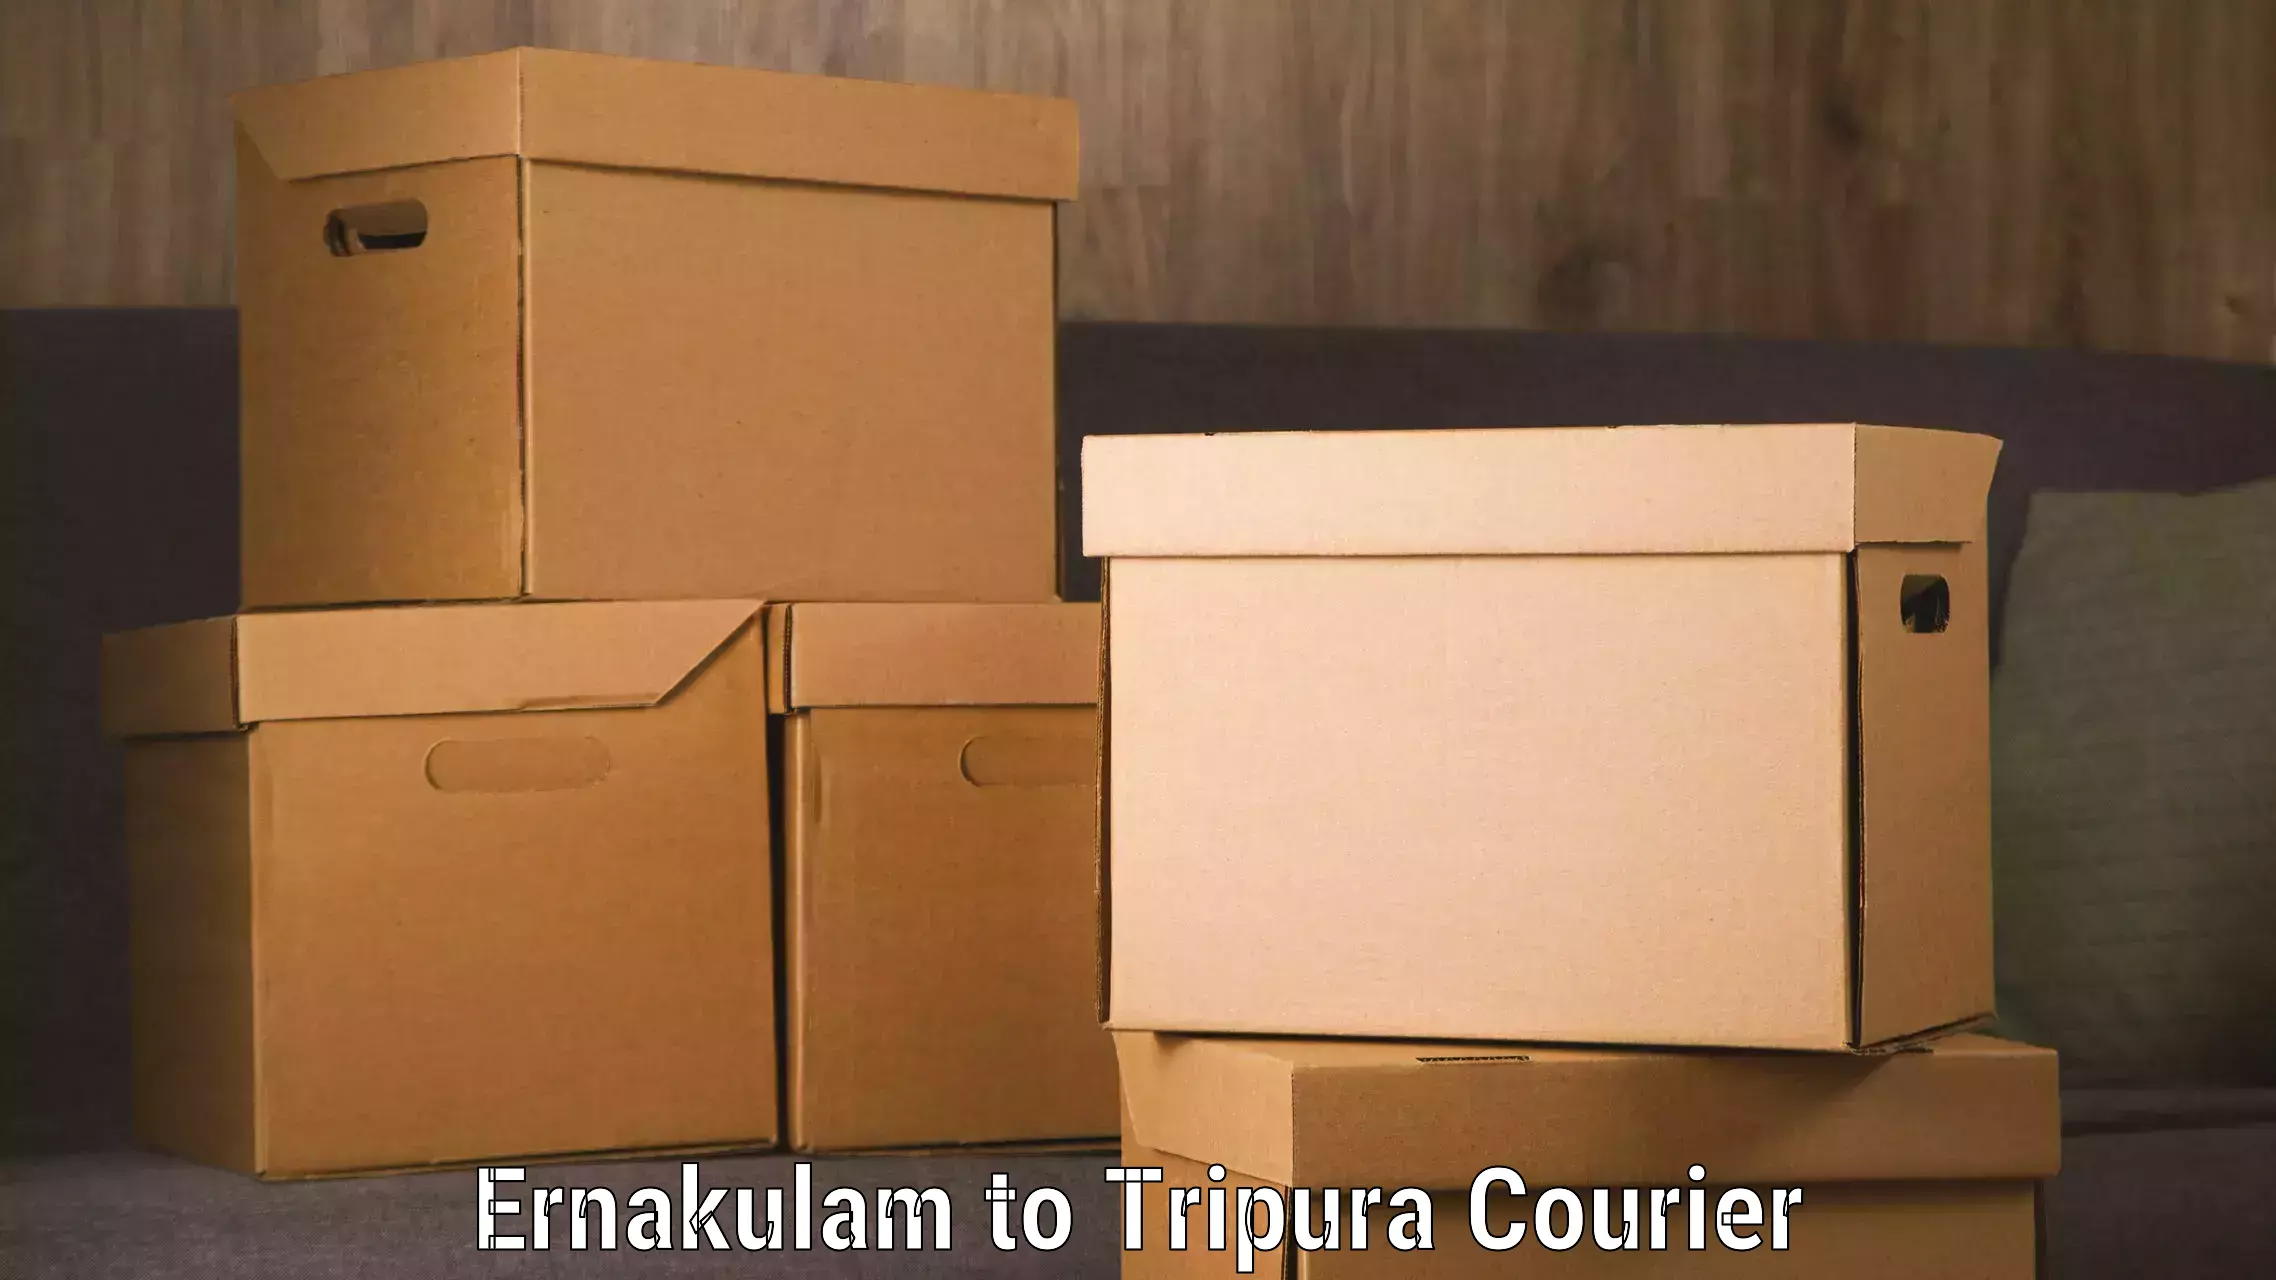 24/7 courier service Ernakulam to Udaipur Tripura